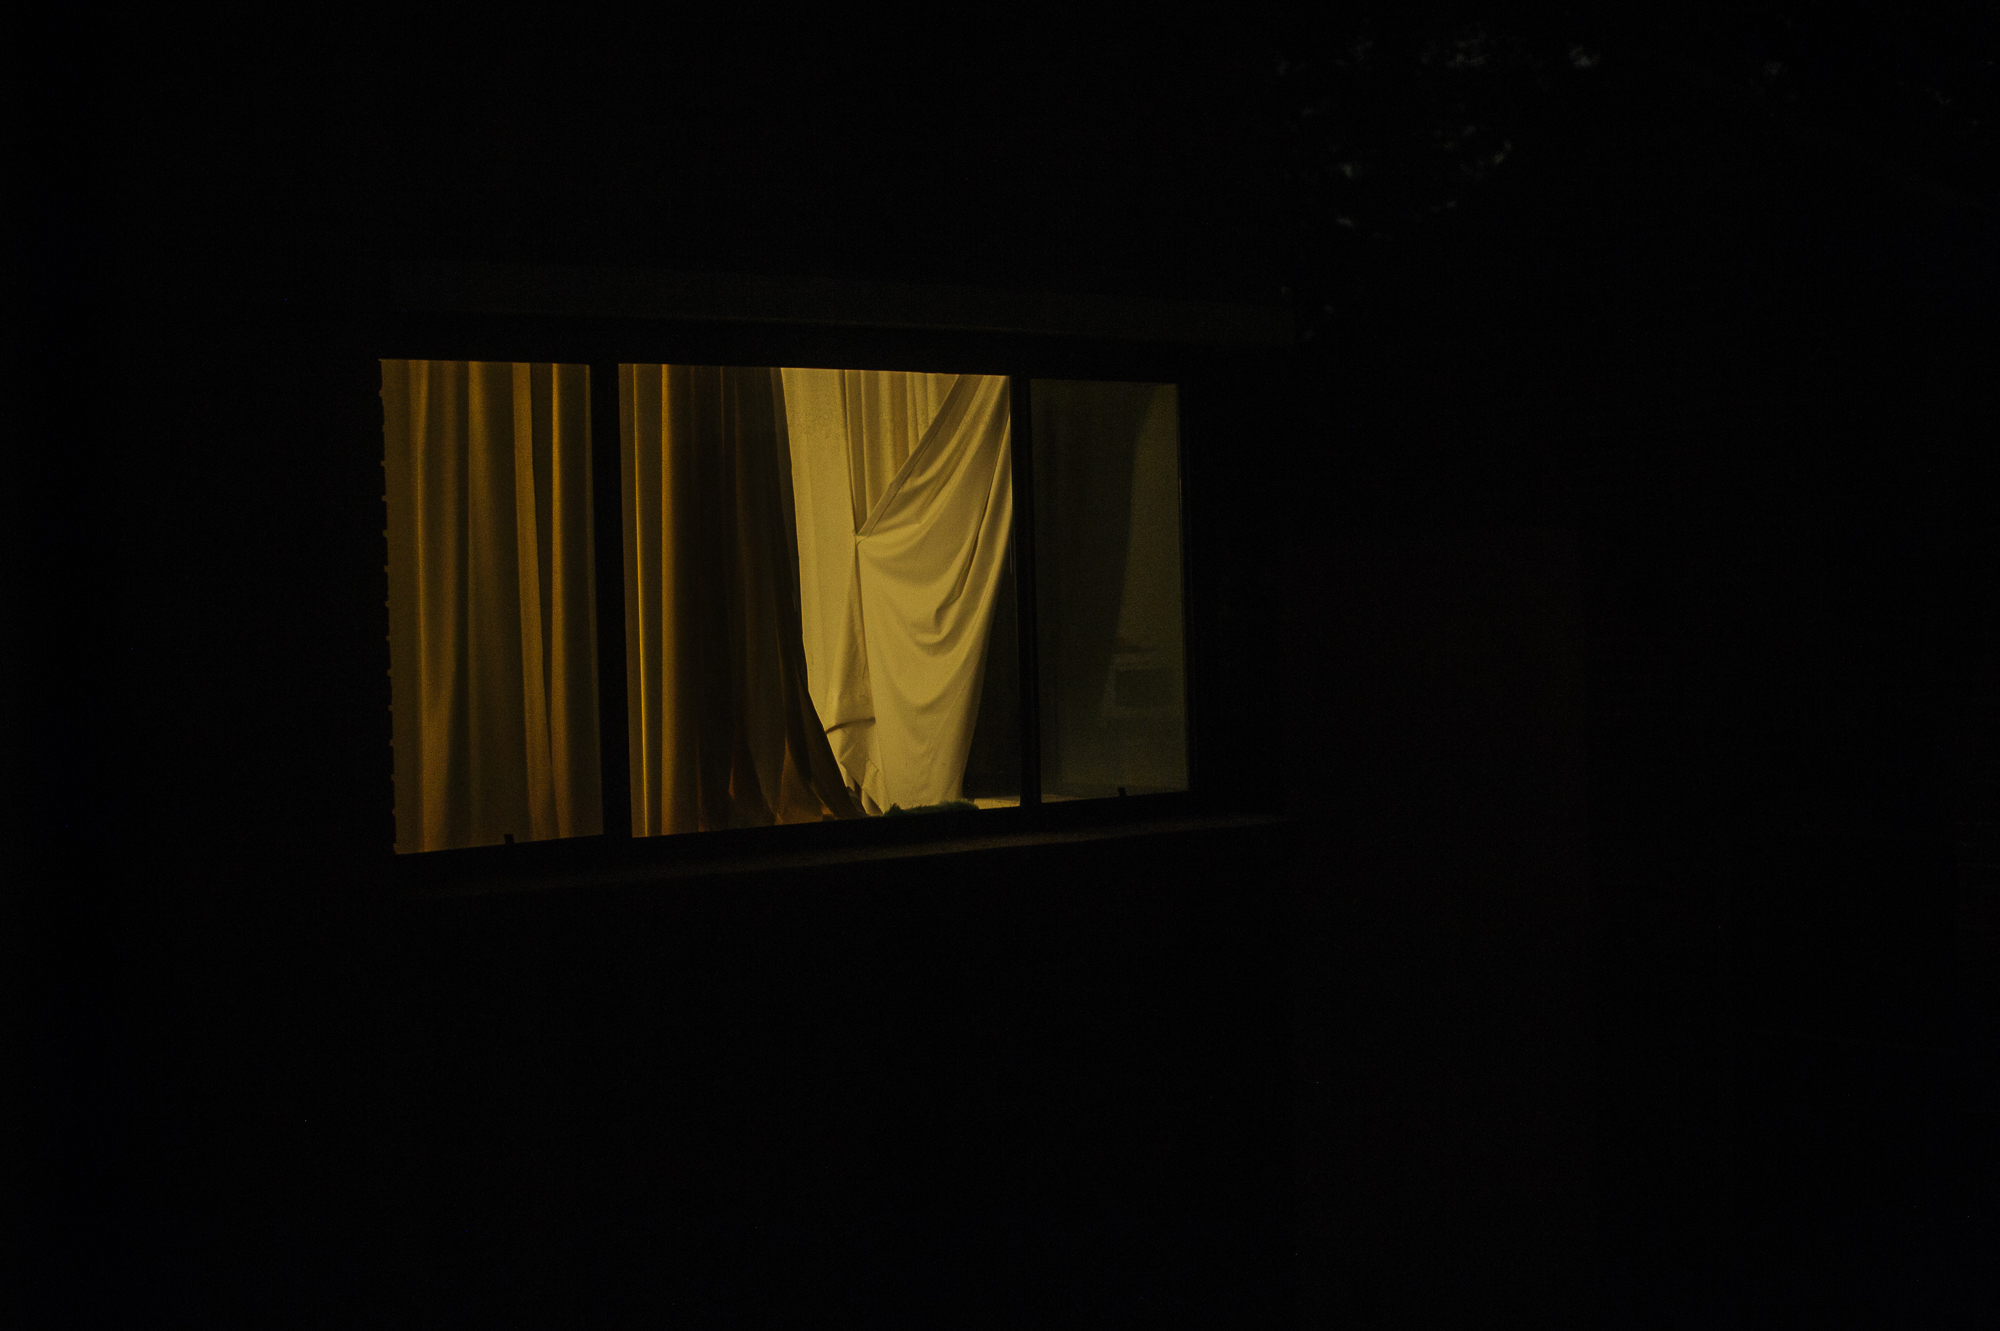  The window across from Bianca’s apartment, 2012.  